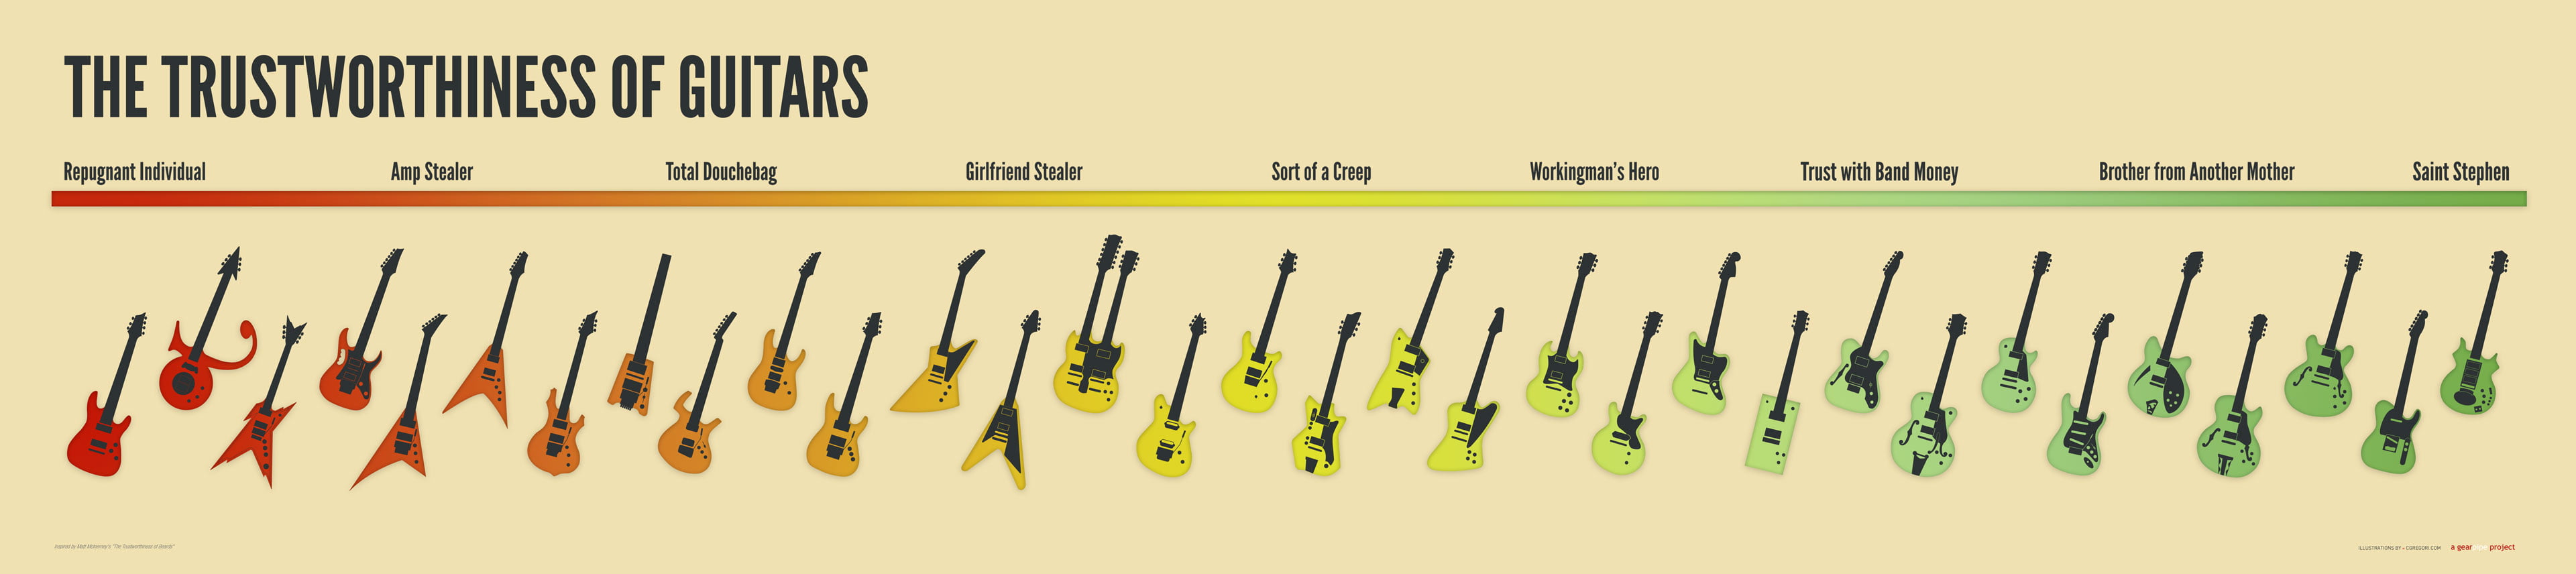 What does your guitar say about you?